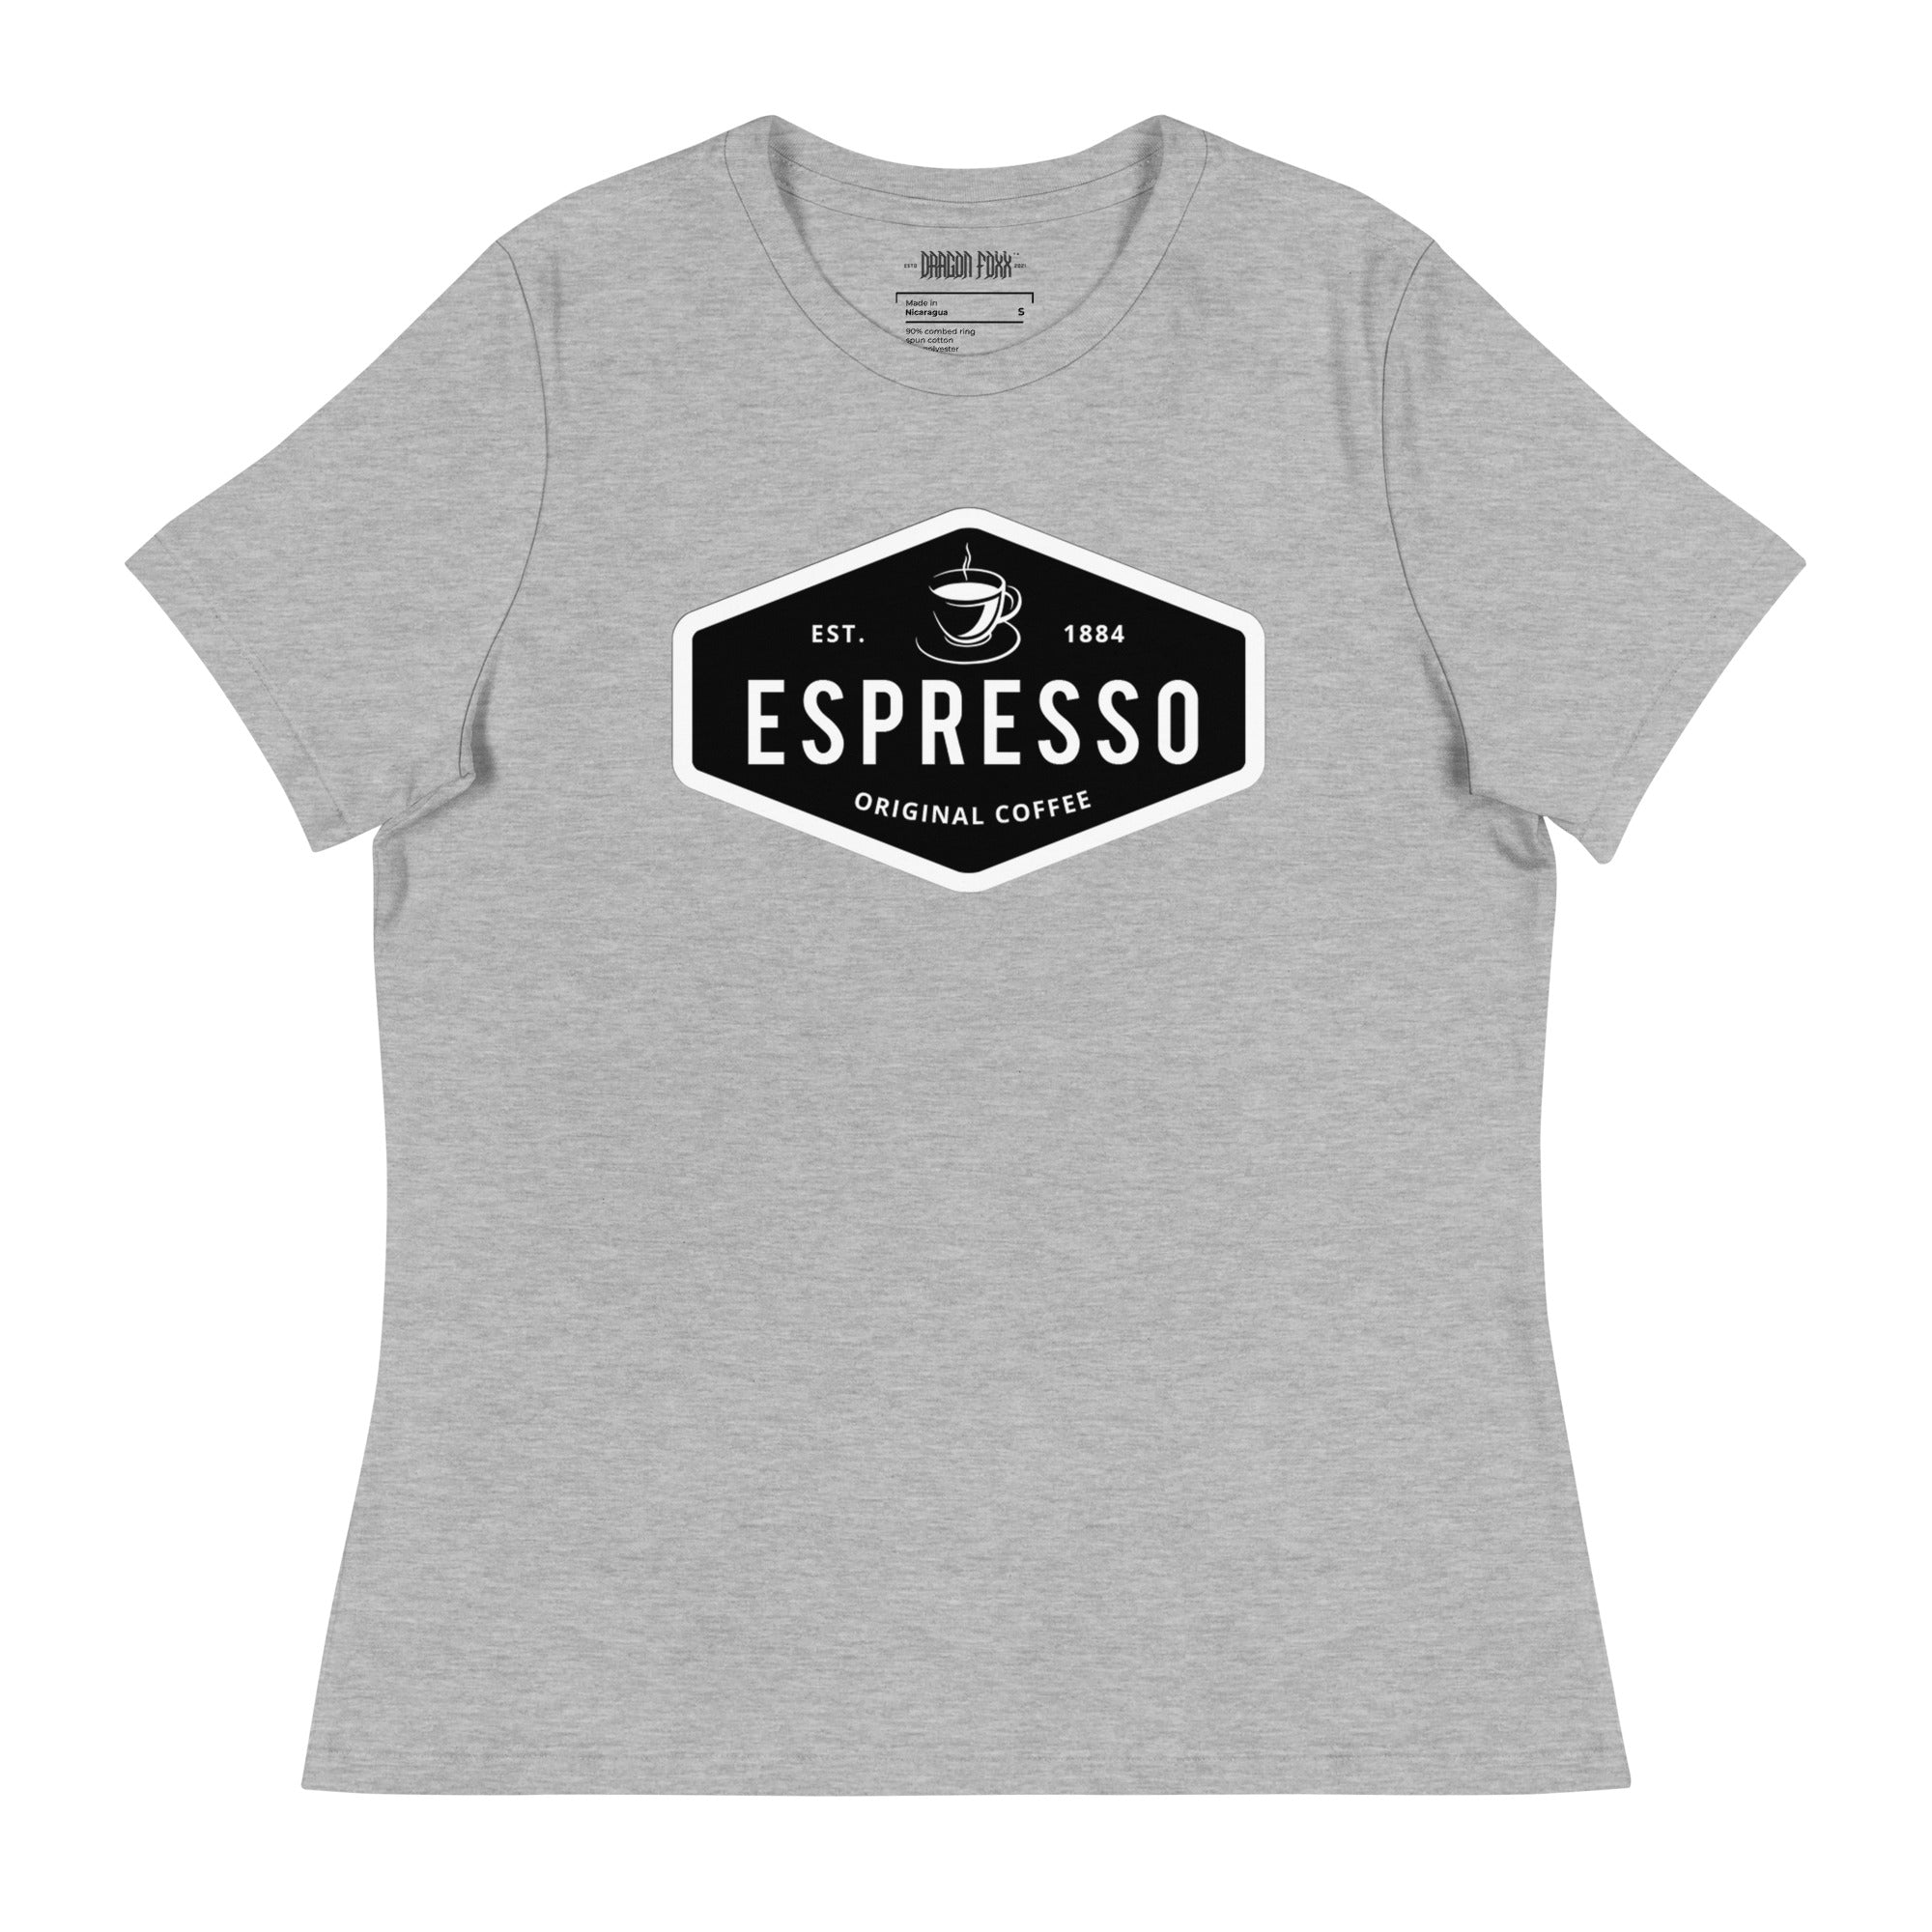 ESPRESSO - Women's Relaxed Fit Graphic T-Shirt in 16 Colors - Women's Relaxed Fit Graphic T-Shirt - DRAGON FOXX™ - 7218598_10176 - Athletic Heather - S - Athletic Heather T-shirt - Berry T-shirt - Black T-shirt